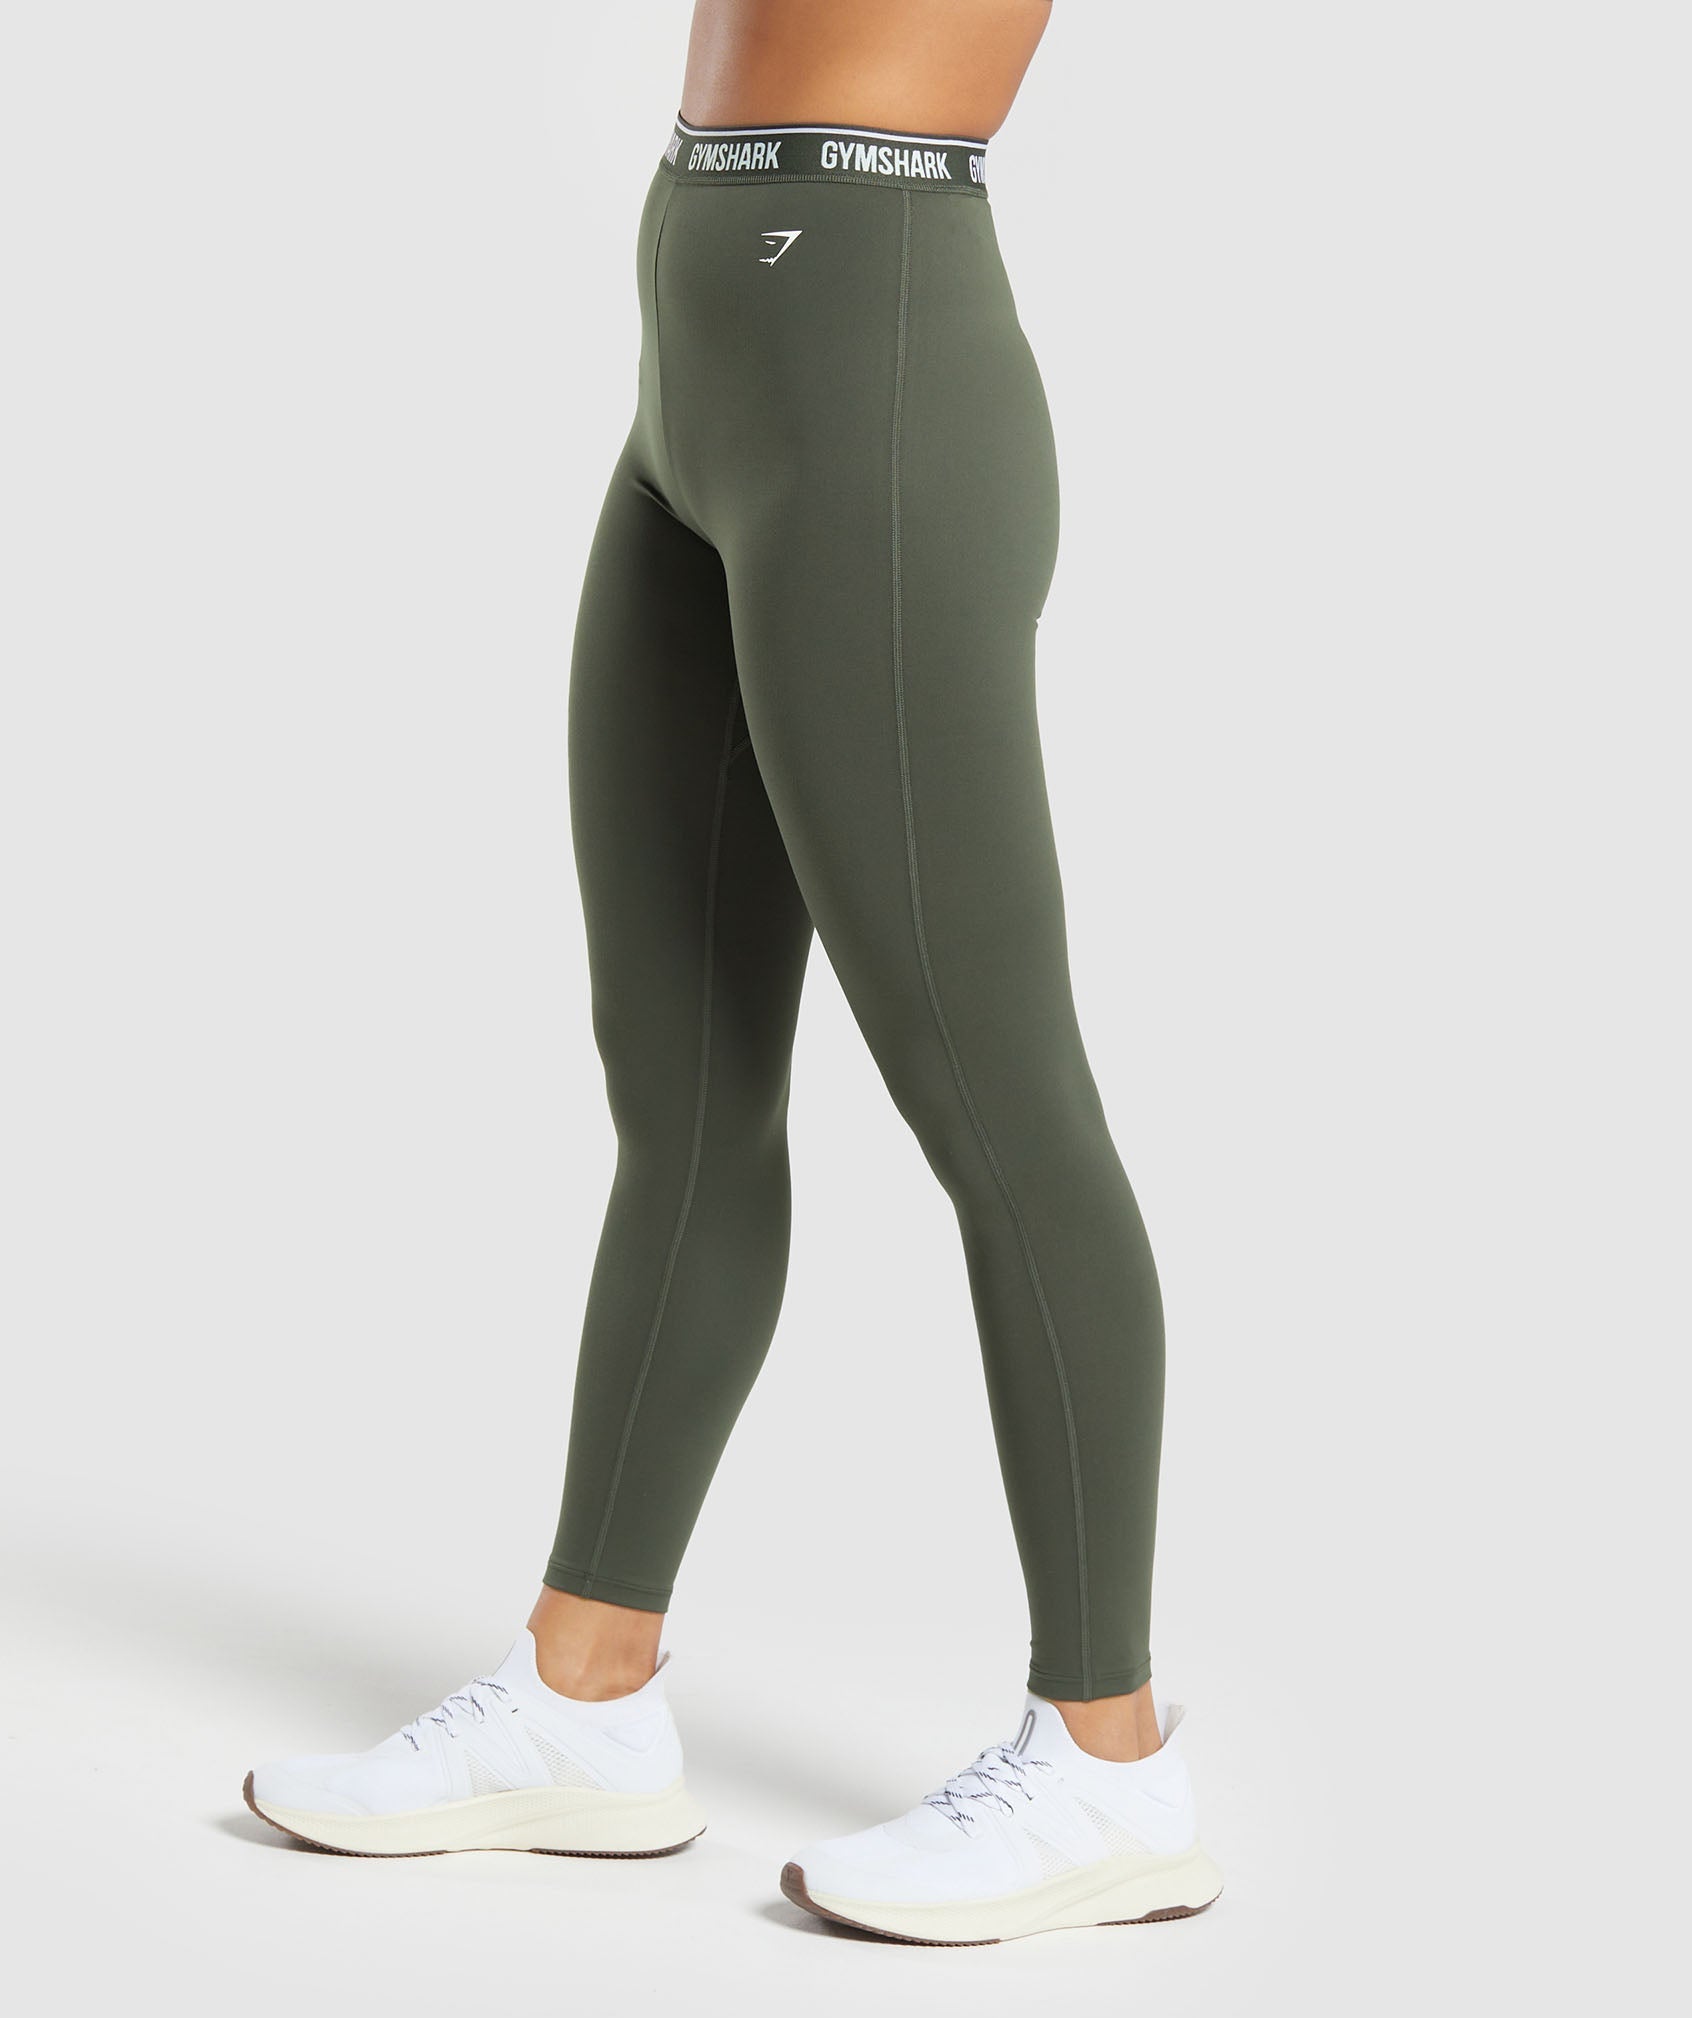 Everyday Waistband Leggings in Strength Green - view 3